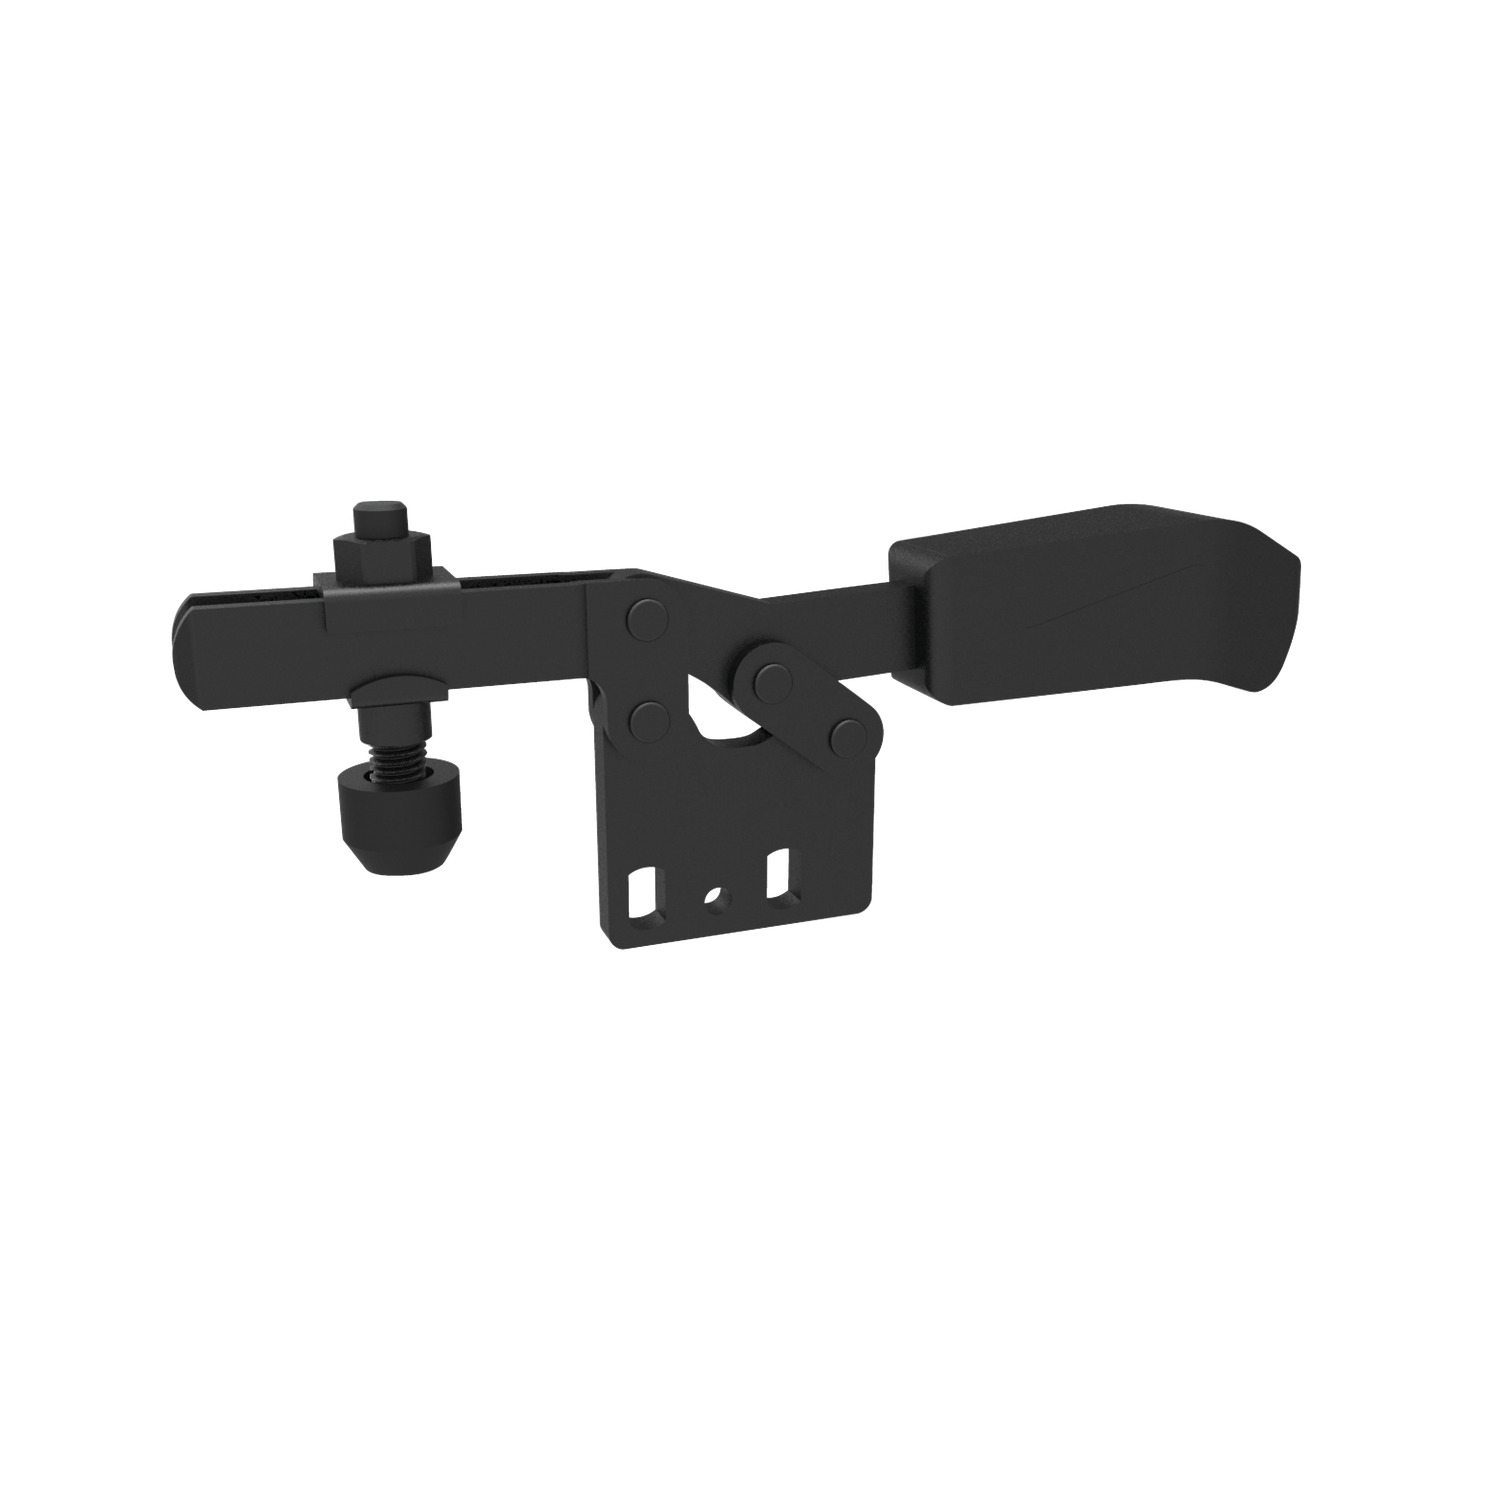 41050.2 - Horizontal Acting Toggle Clamps